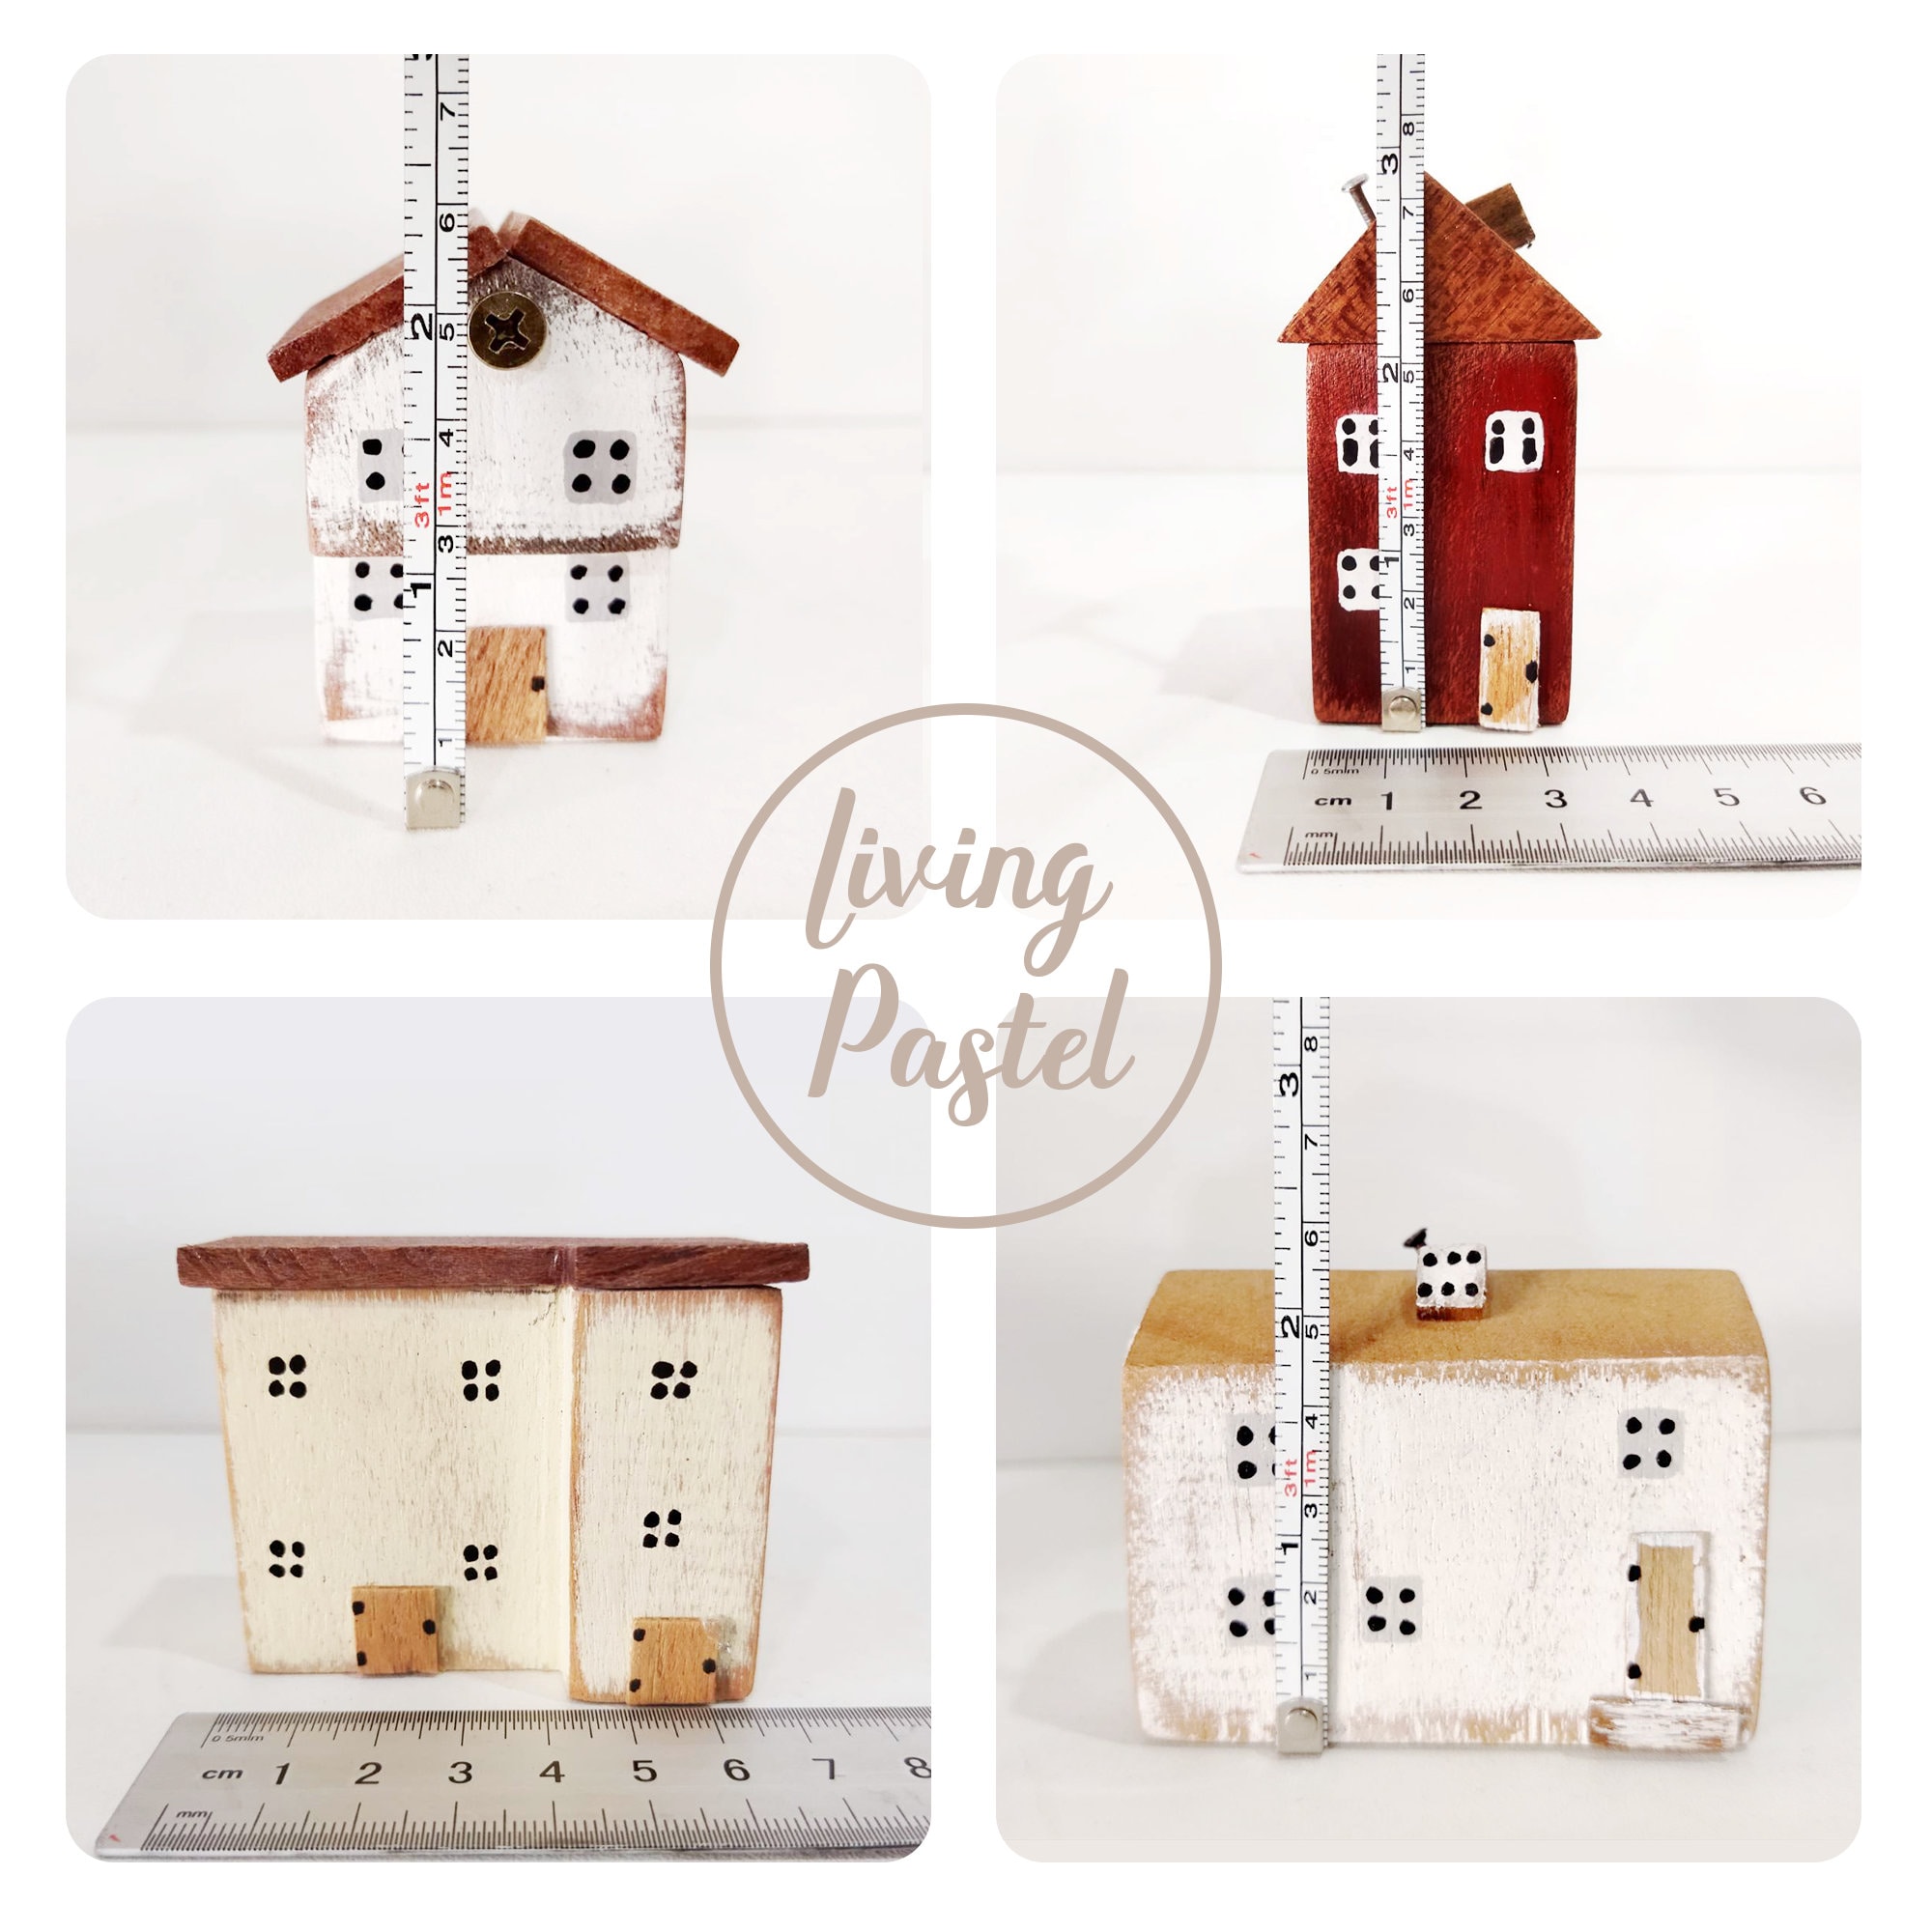 Wooden Houses Adult Craft Wooden Kit, Small Wooden House Kids Coloring Kit  - Shop Village Story Illustration, Painting & Calligraphy - Pinkoi